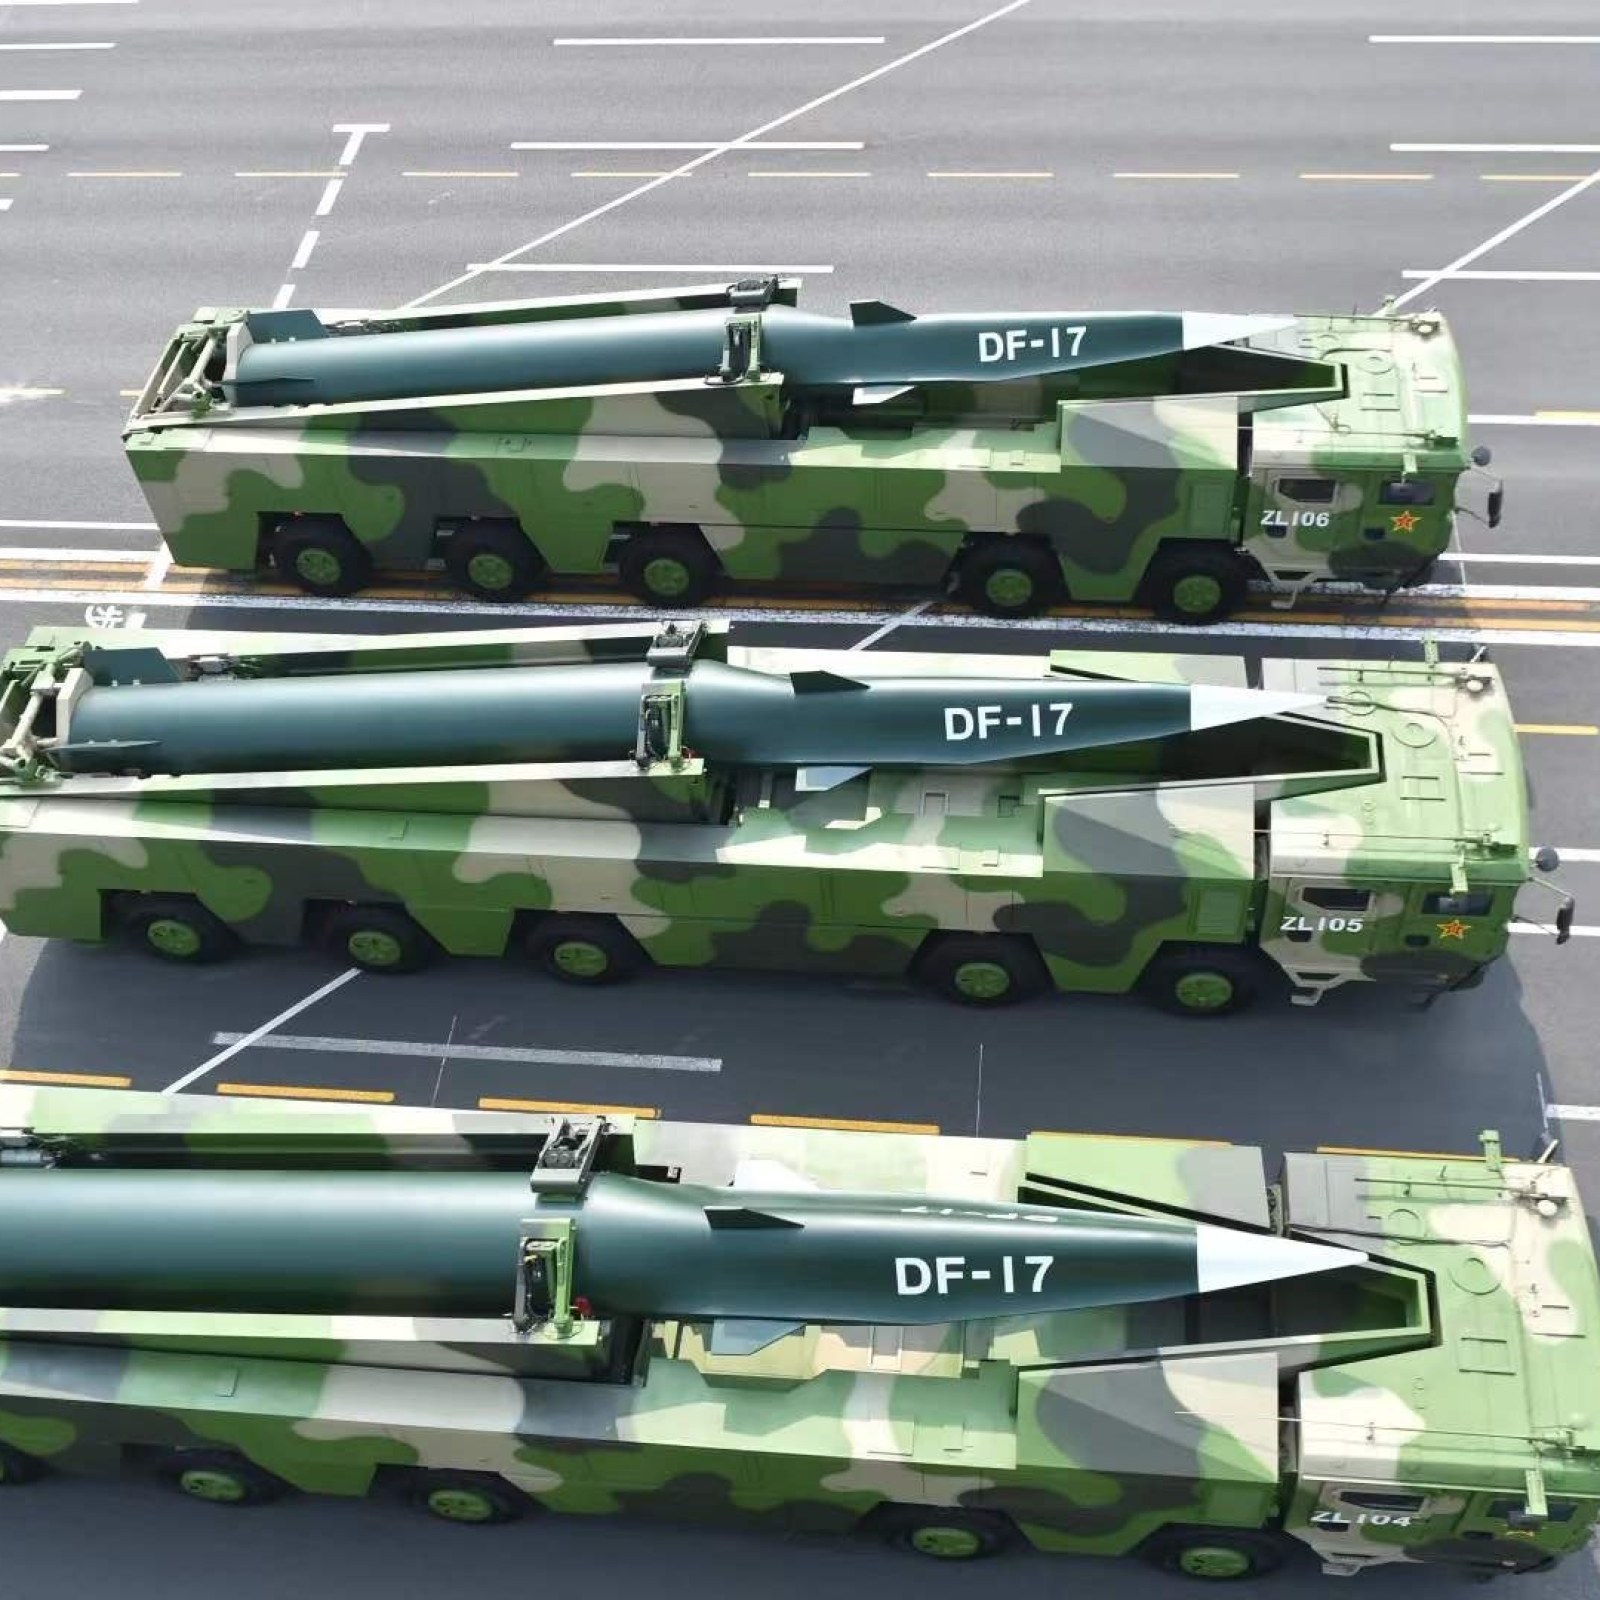 dongfeng-17-hypersonic-missiles.jpg